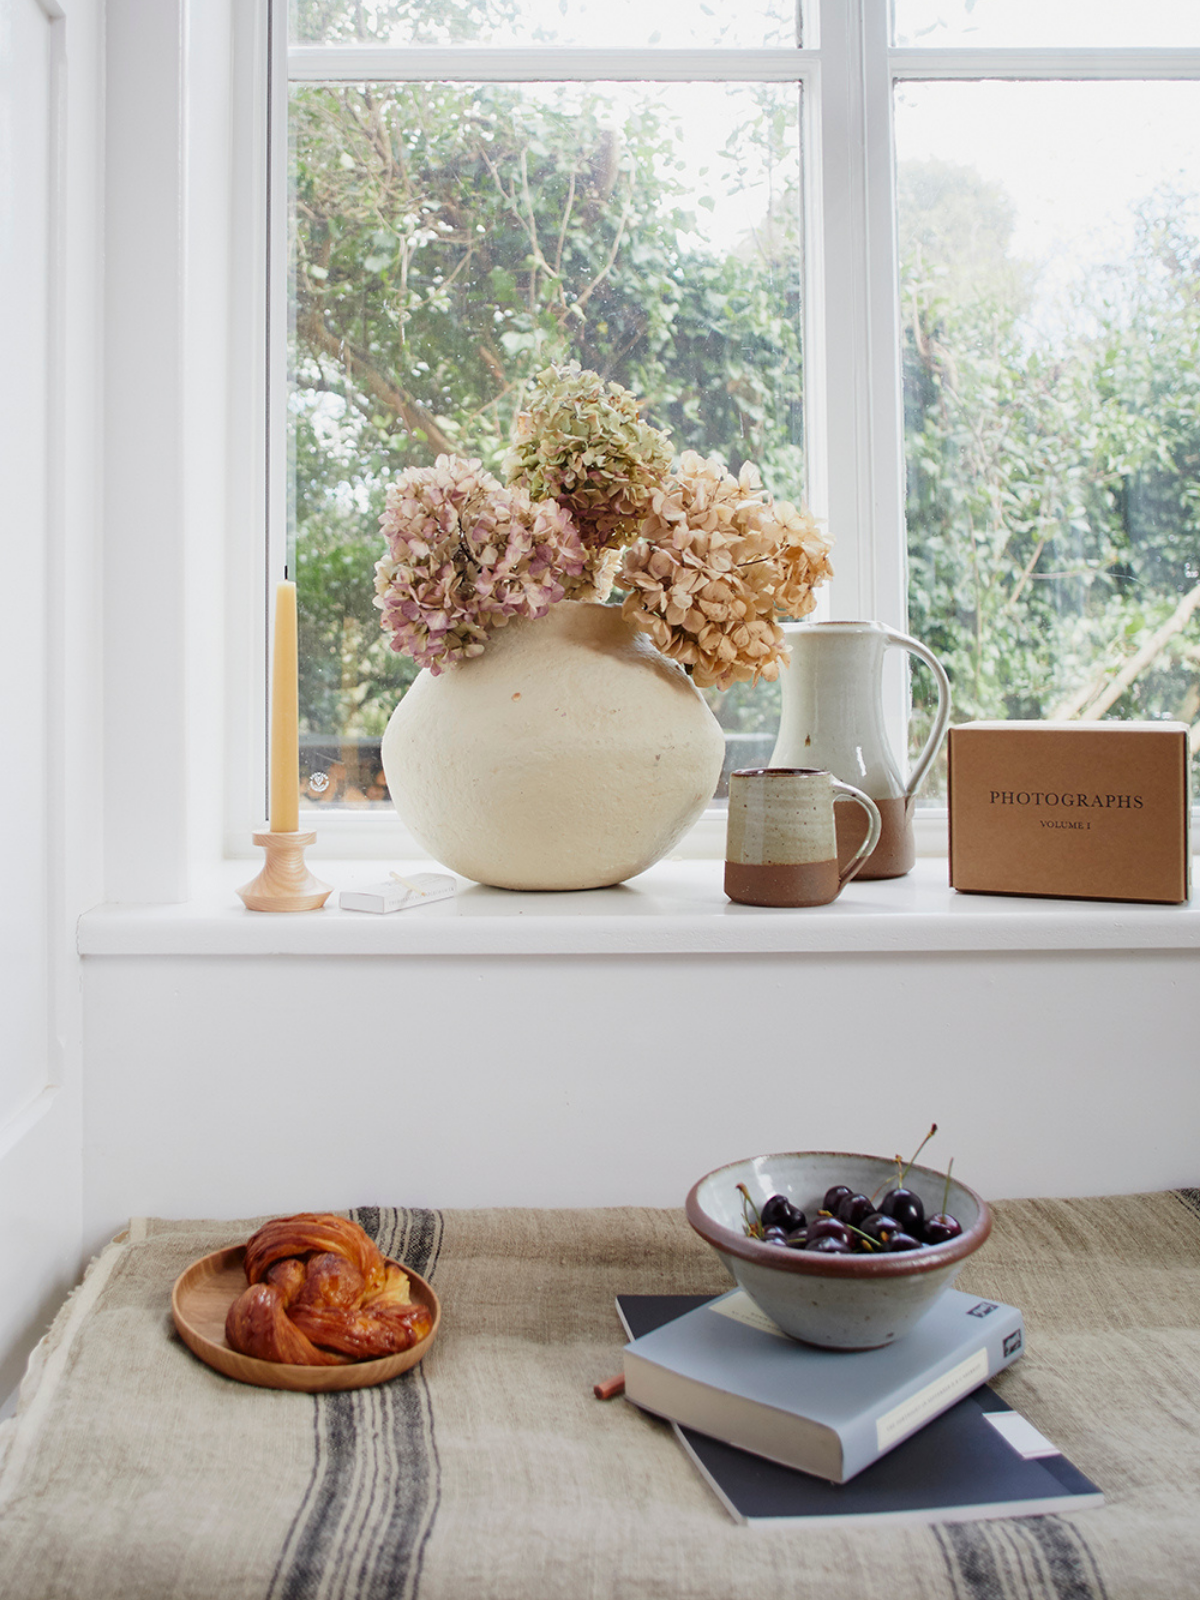 Books, flowers and a bowl of cherries on a window sill